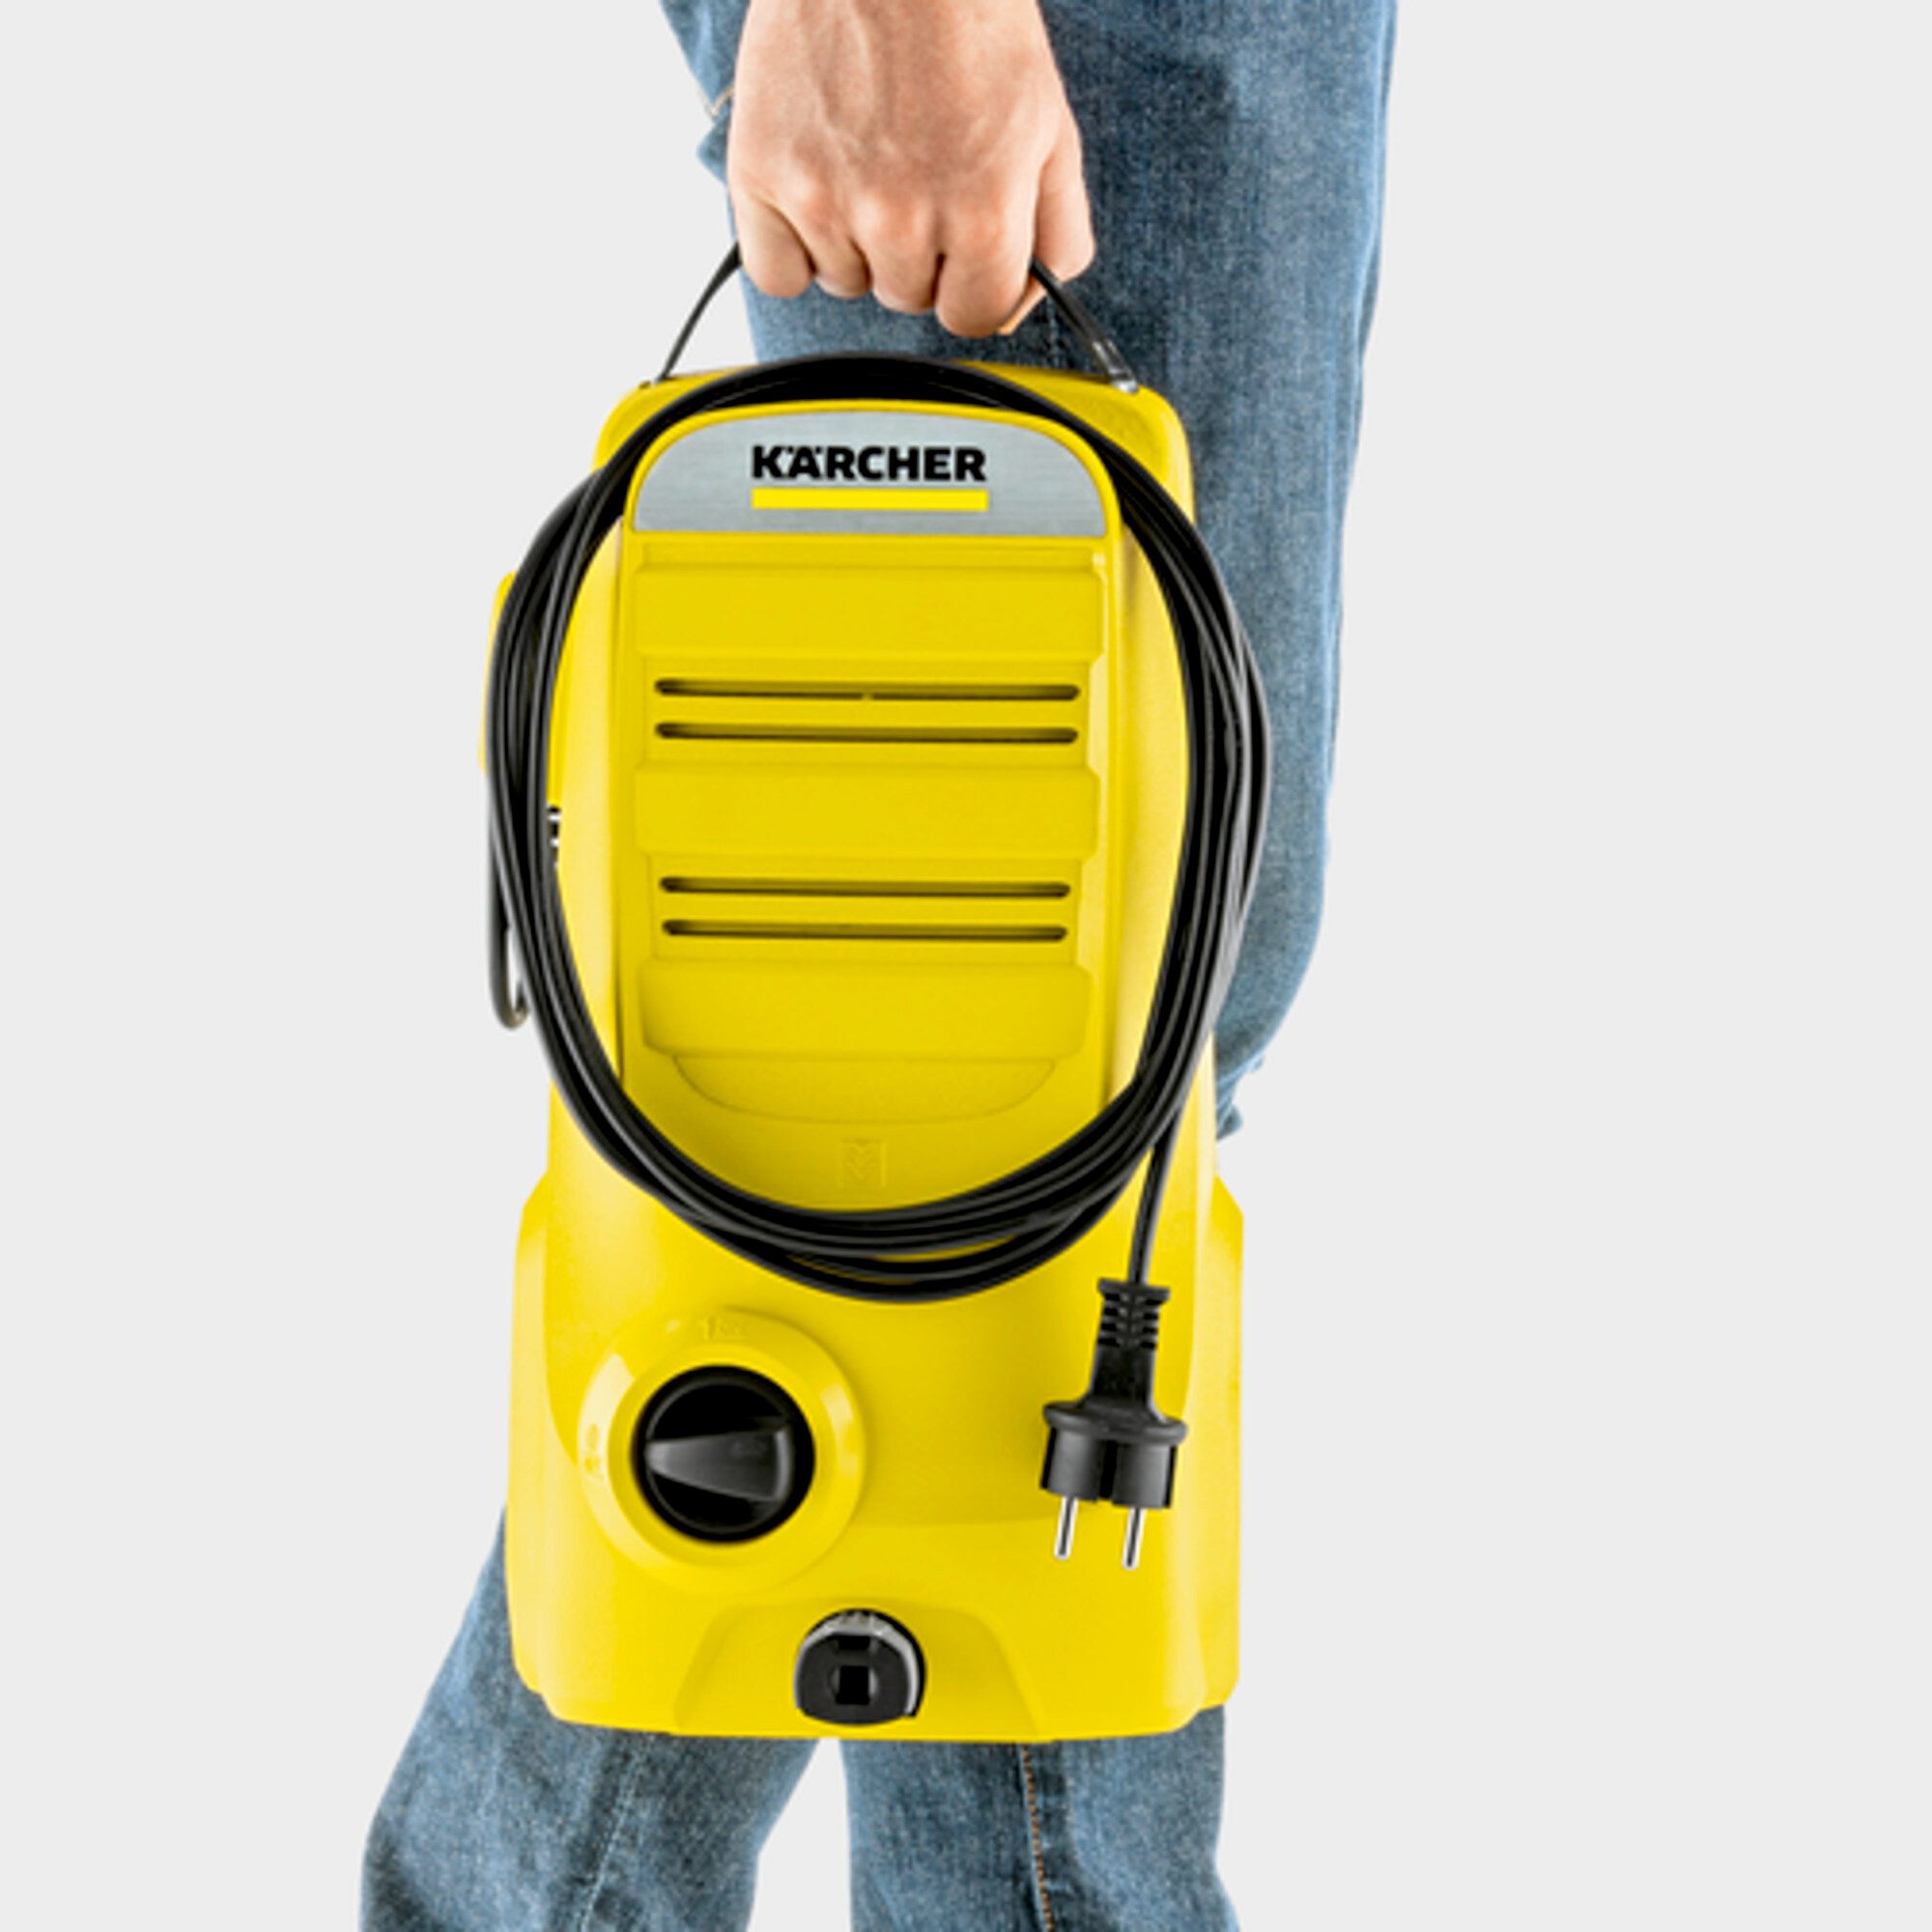 High pressure washer K 2 Compact Car: Sits comfortably in the hand